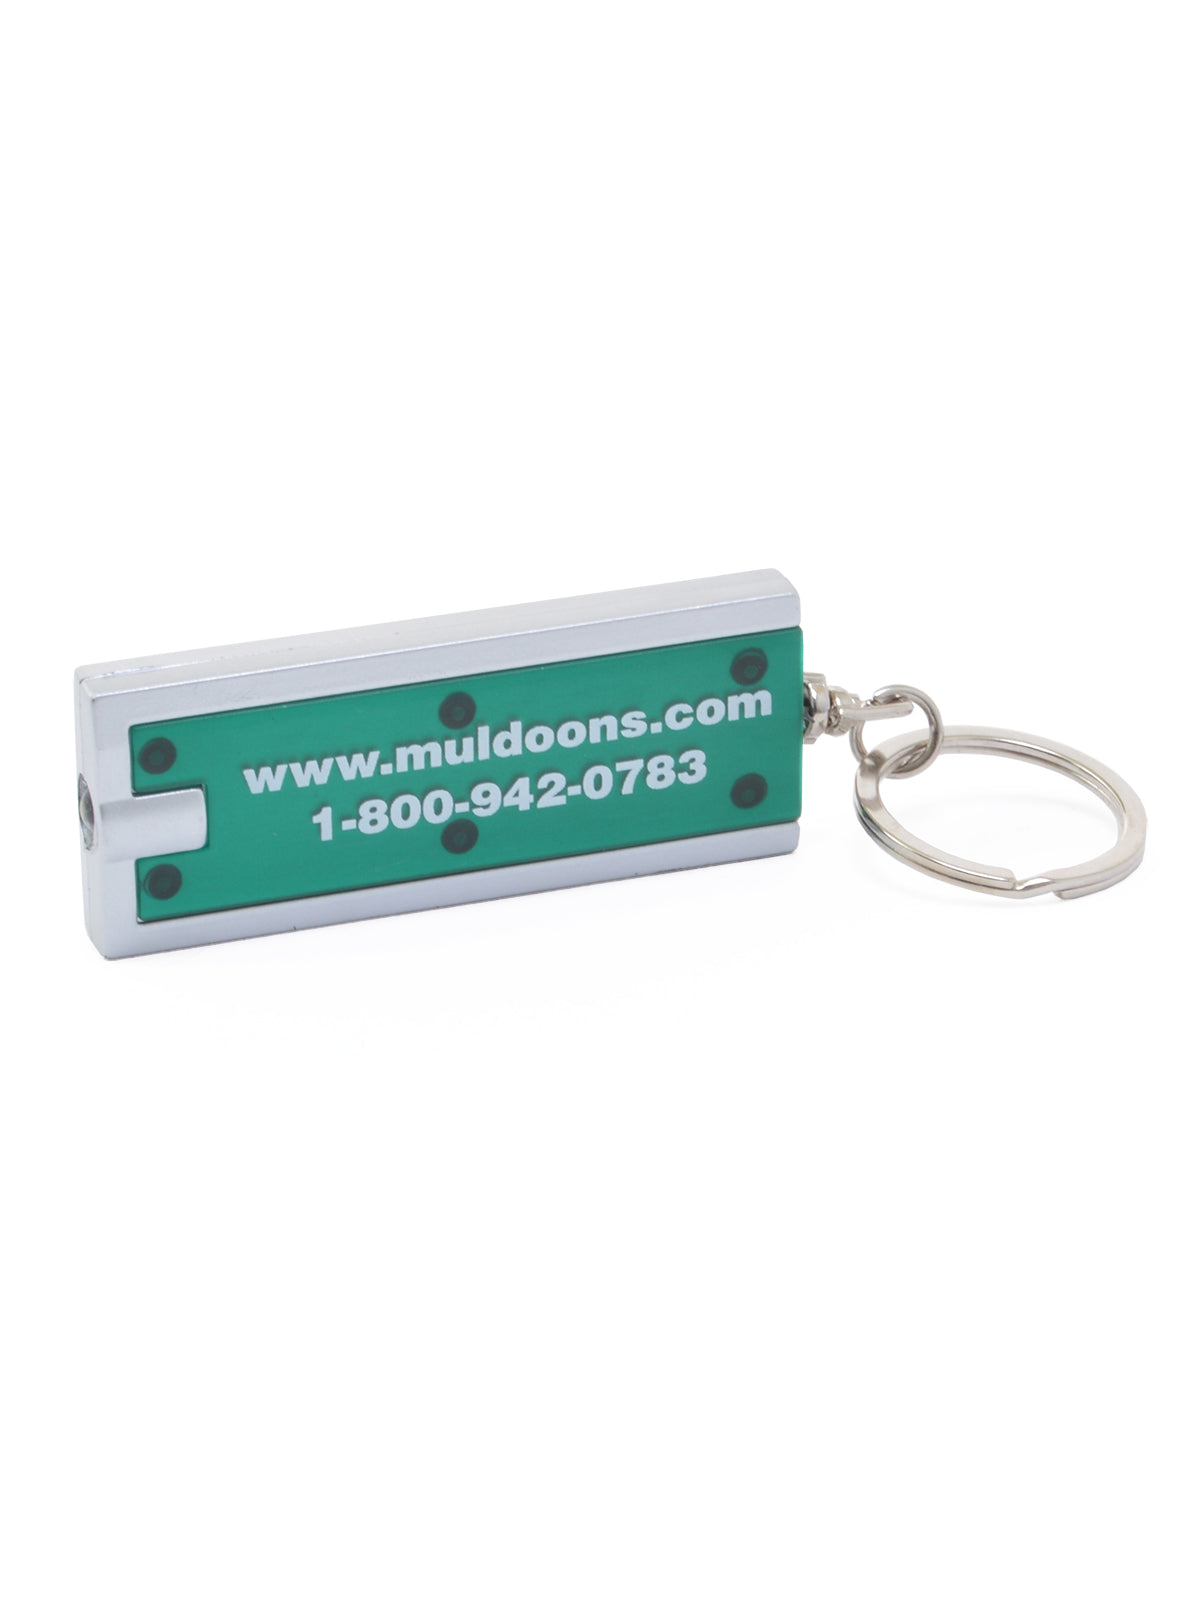 Muldoon's Key Ring with Light